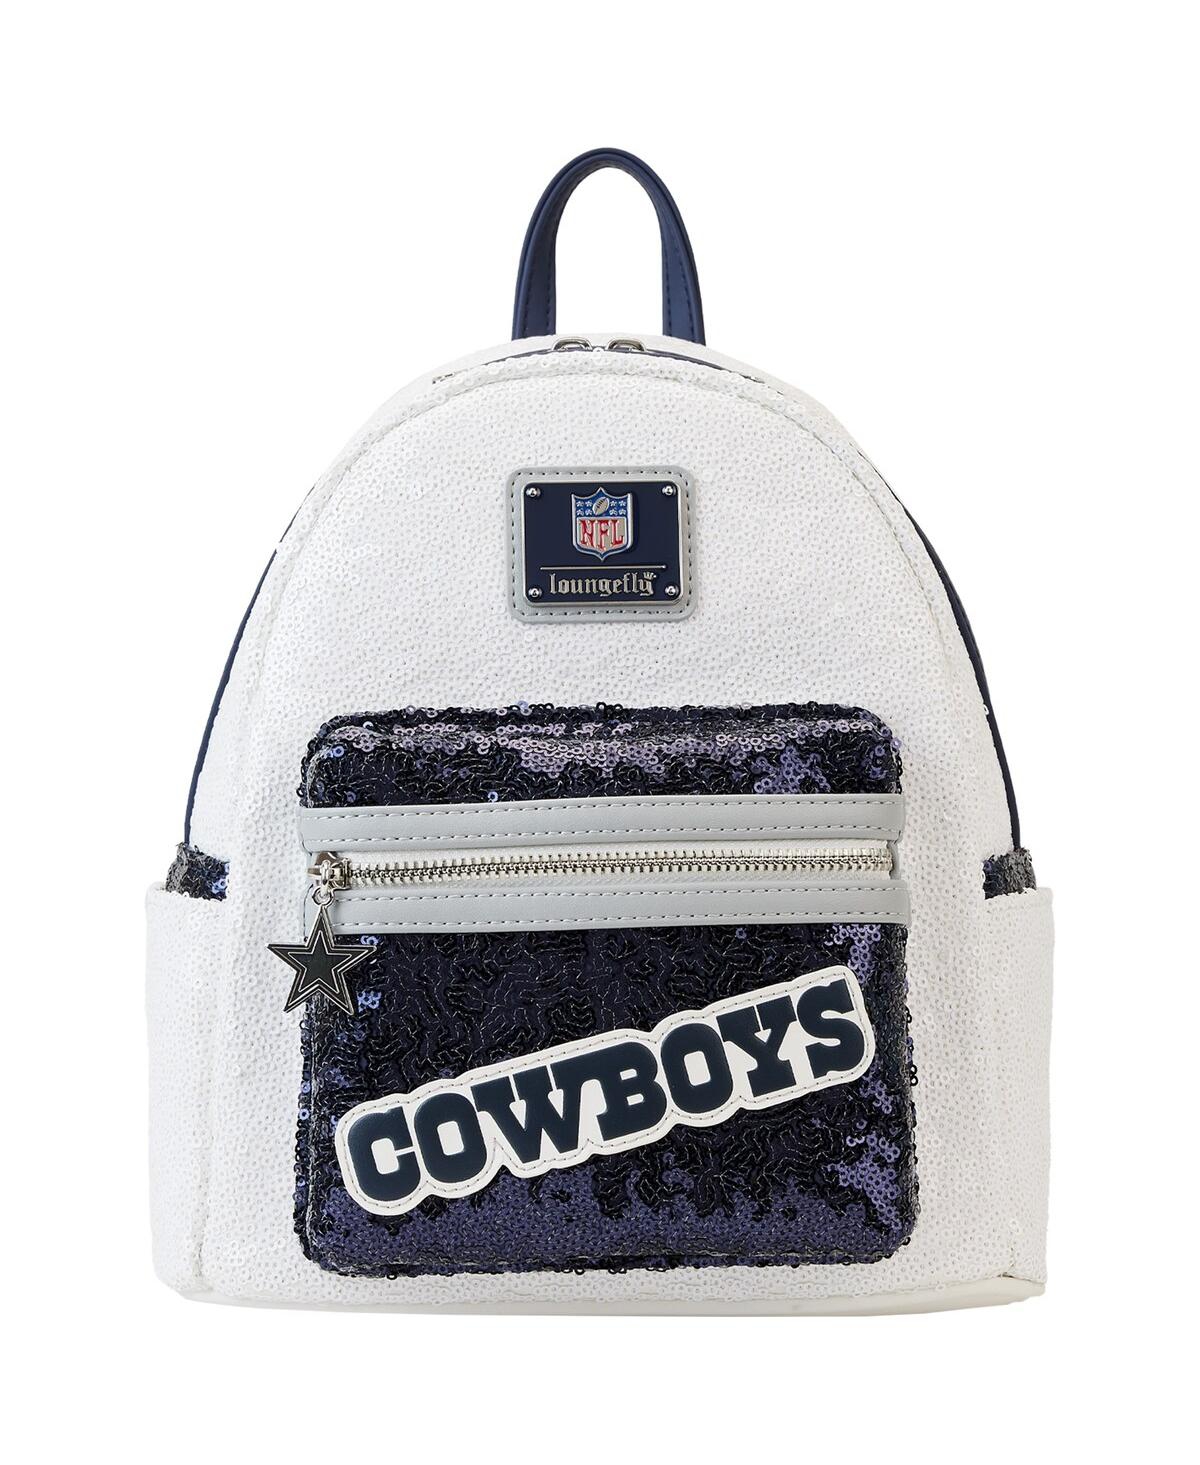 Men's and Women's Loungefly Dallas Cowboys Sequin Mini Backpack - White, Black